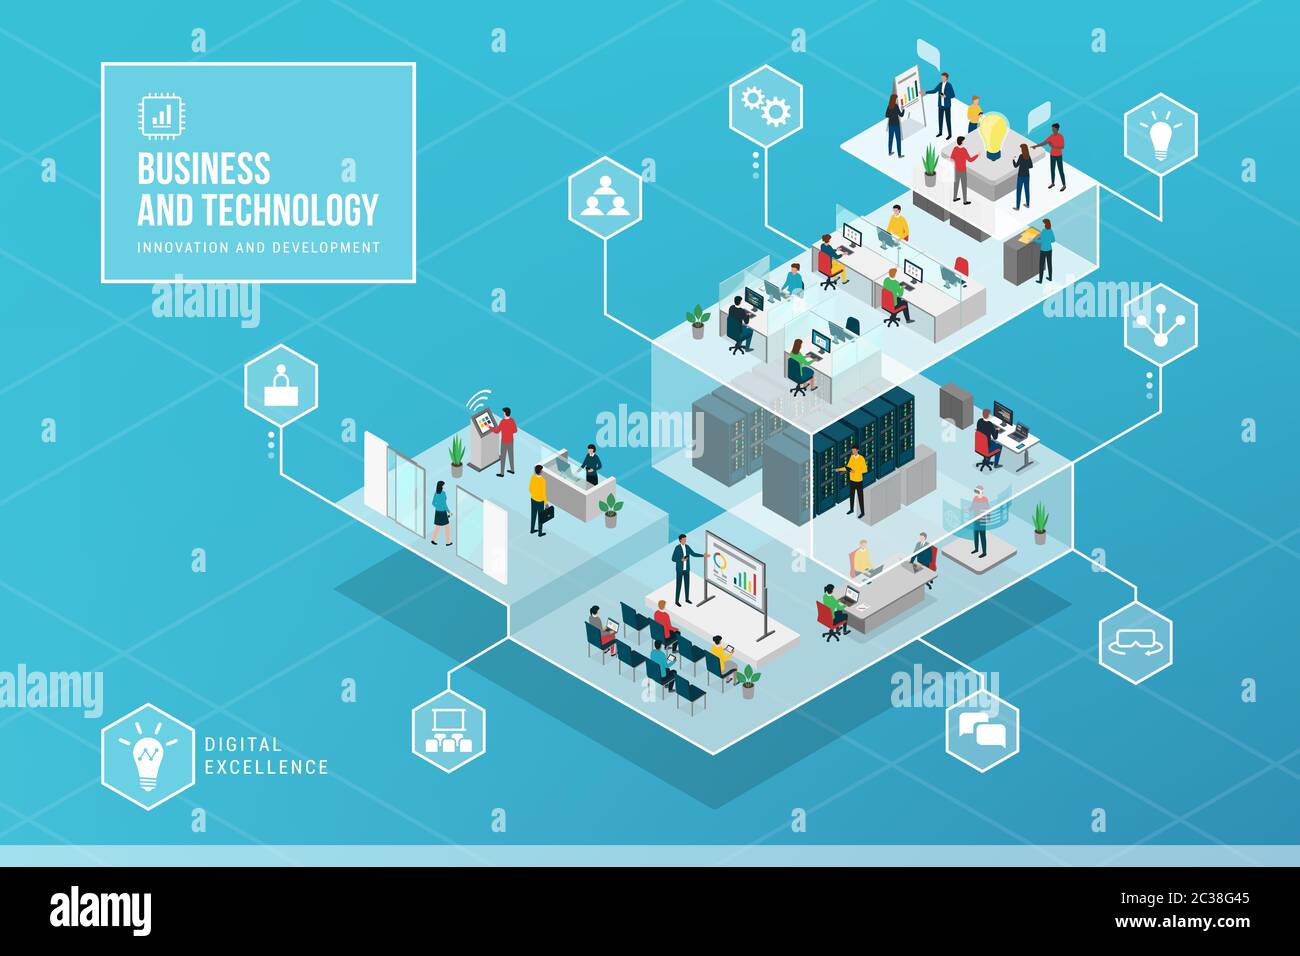 Business innovation and technology isometric infographic: technological innovation and tasks in a corporate IT company Stock Vector